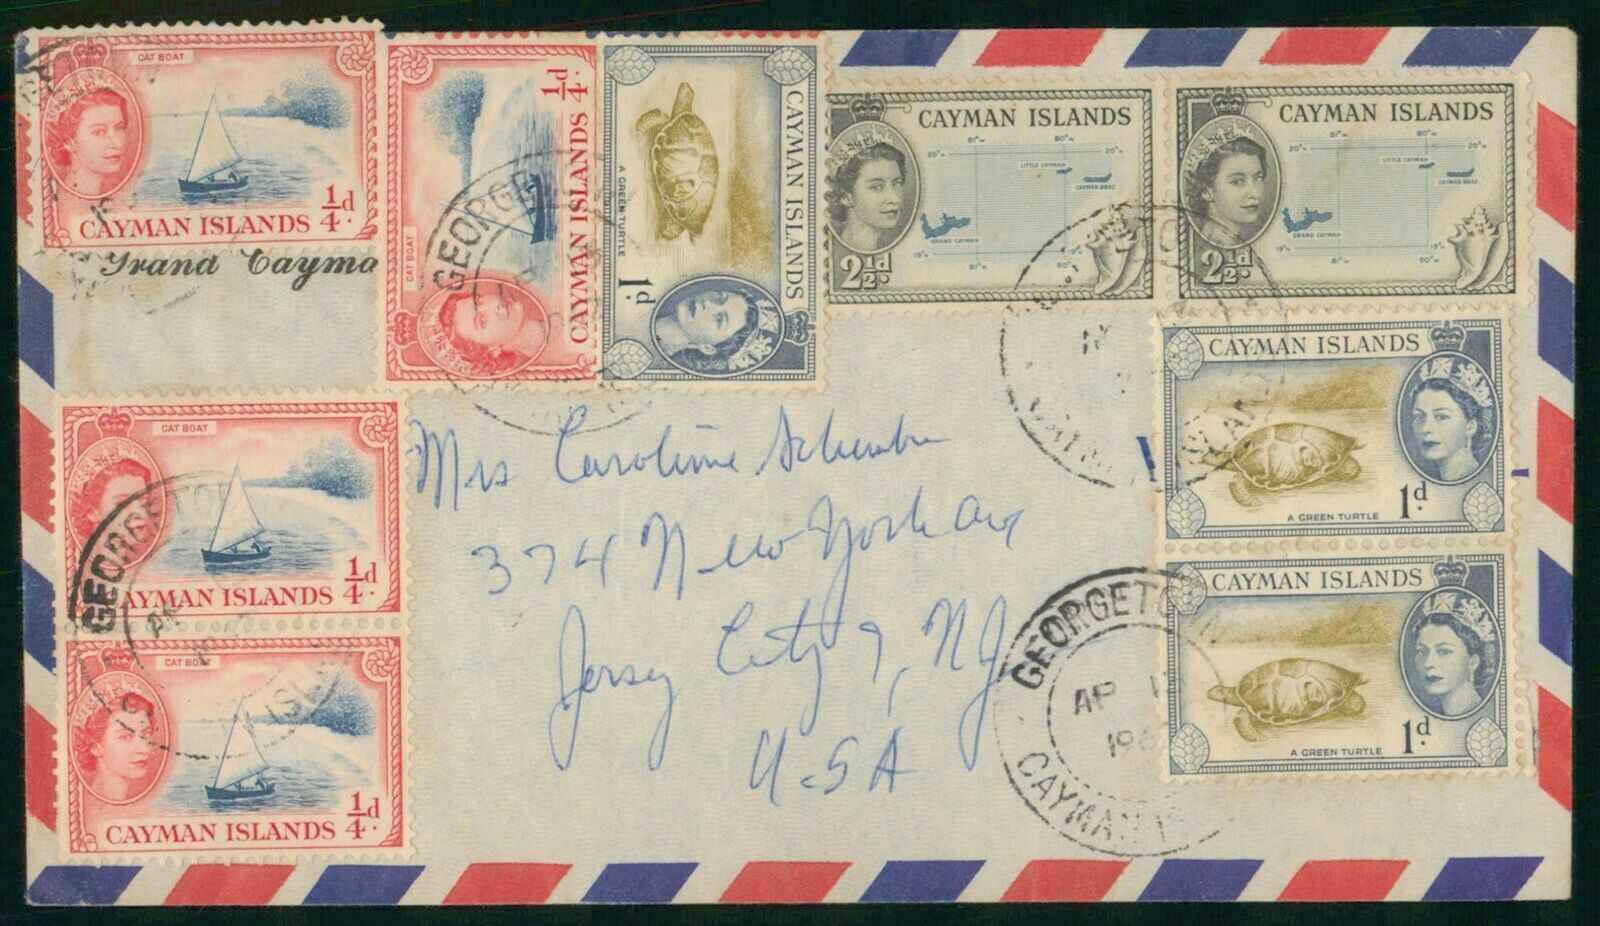 Cayman Islands 1962 Georgetown To Jersey City Nj Airmail Cover